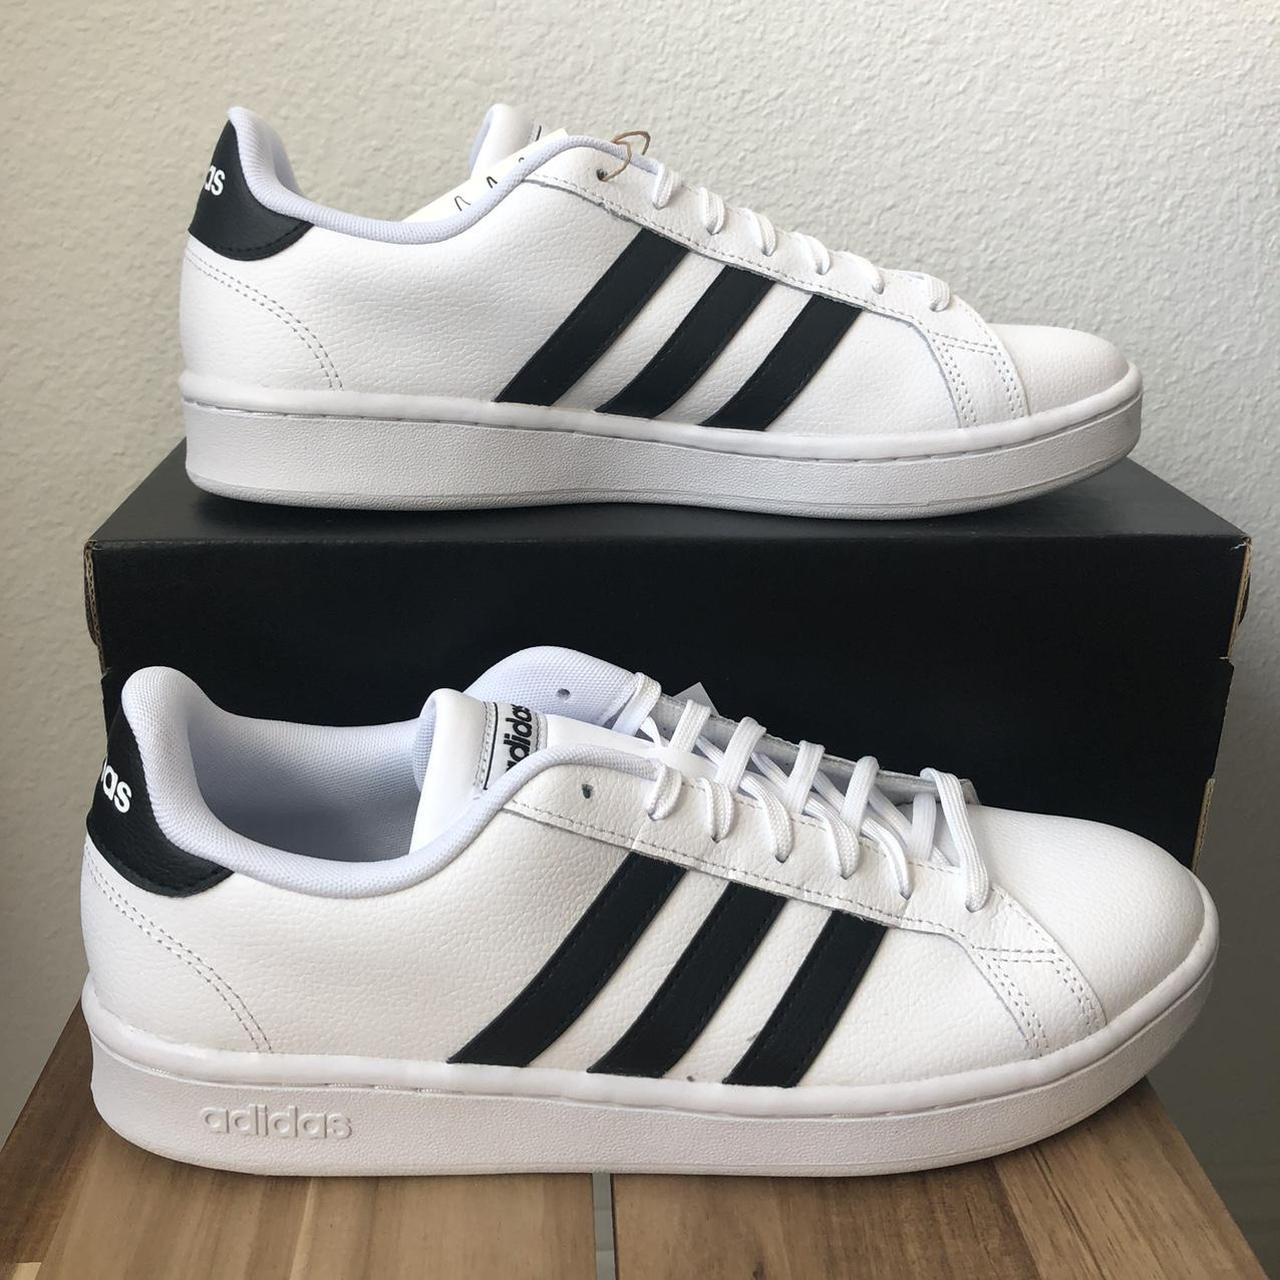 Adidas Grand Court White/Black Sneakers Classic... - Depop